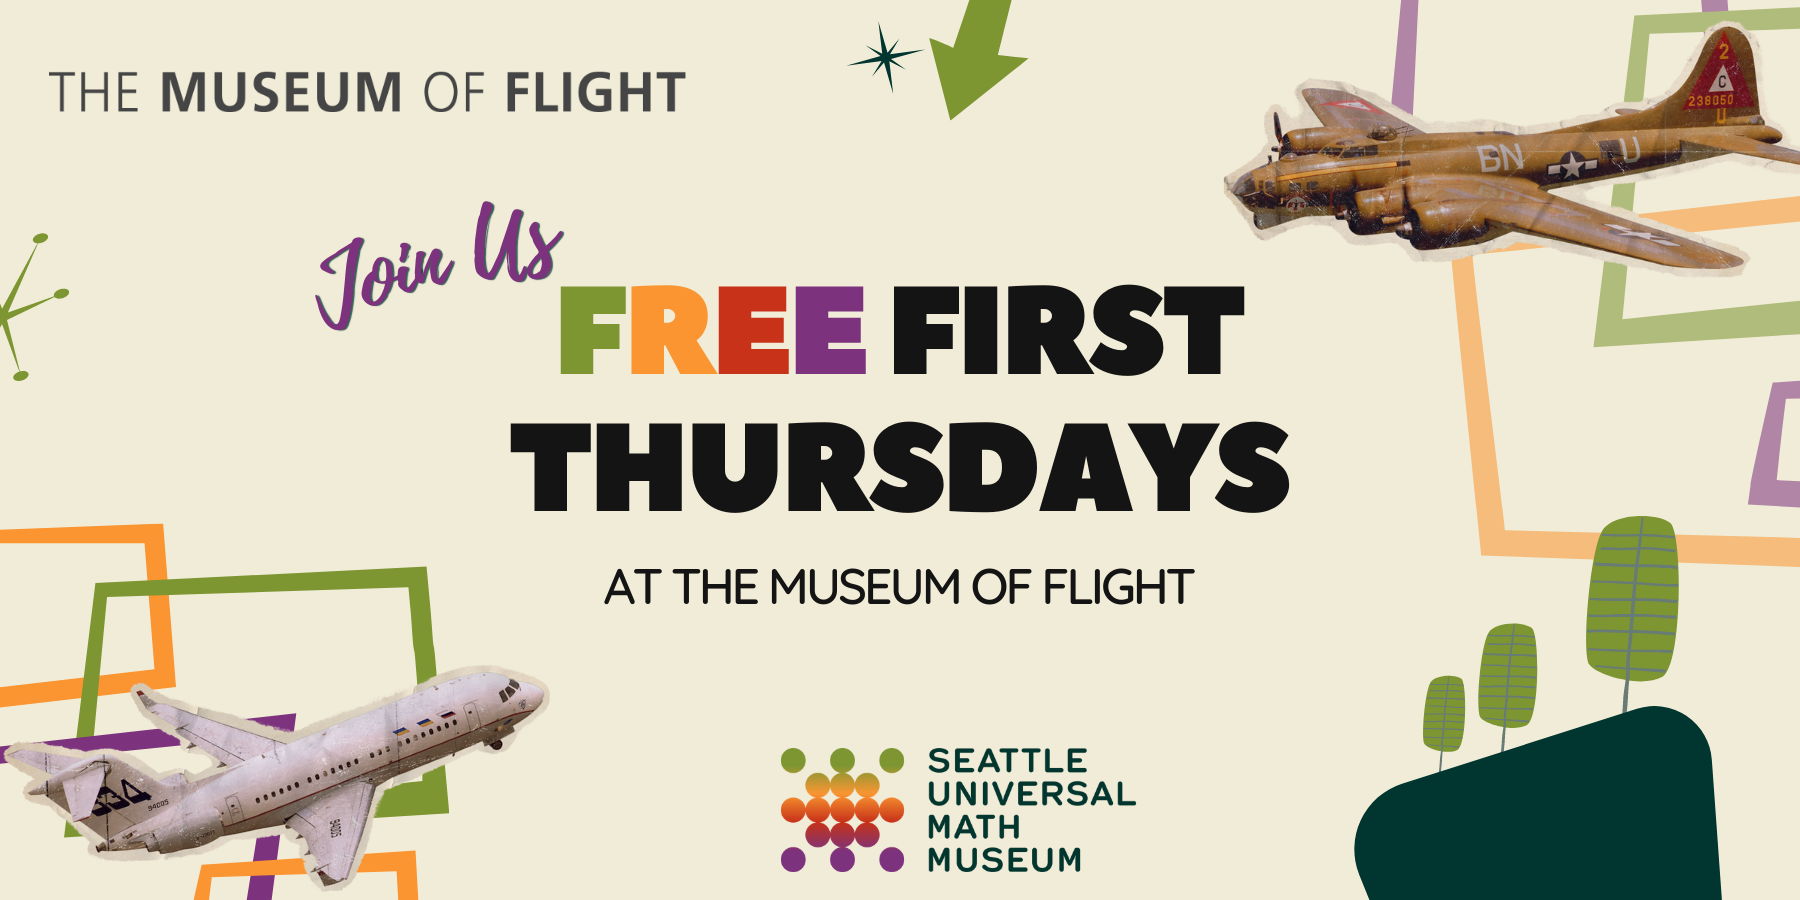 First Thursdays at The Museum of Flight promotional image